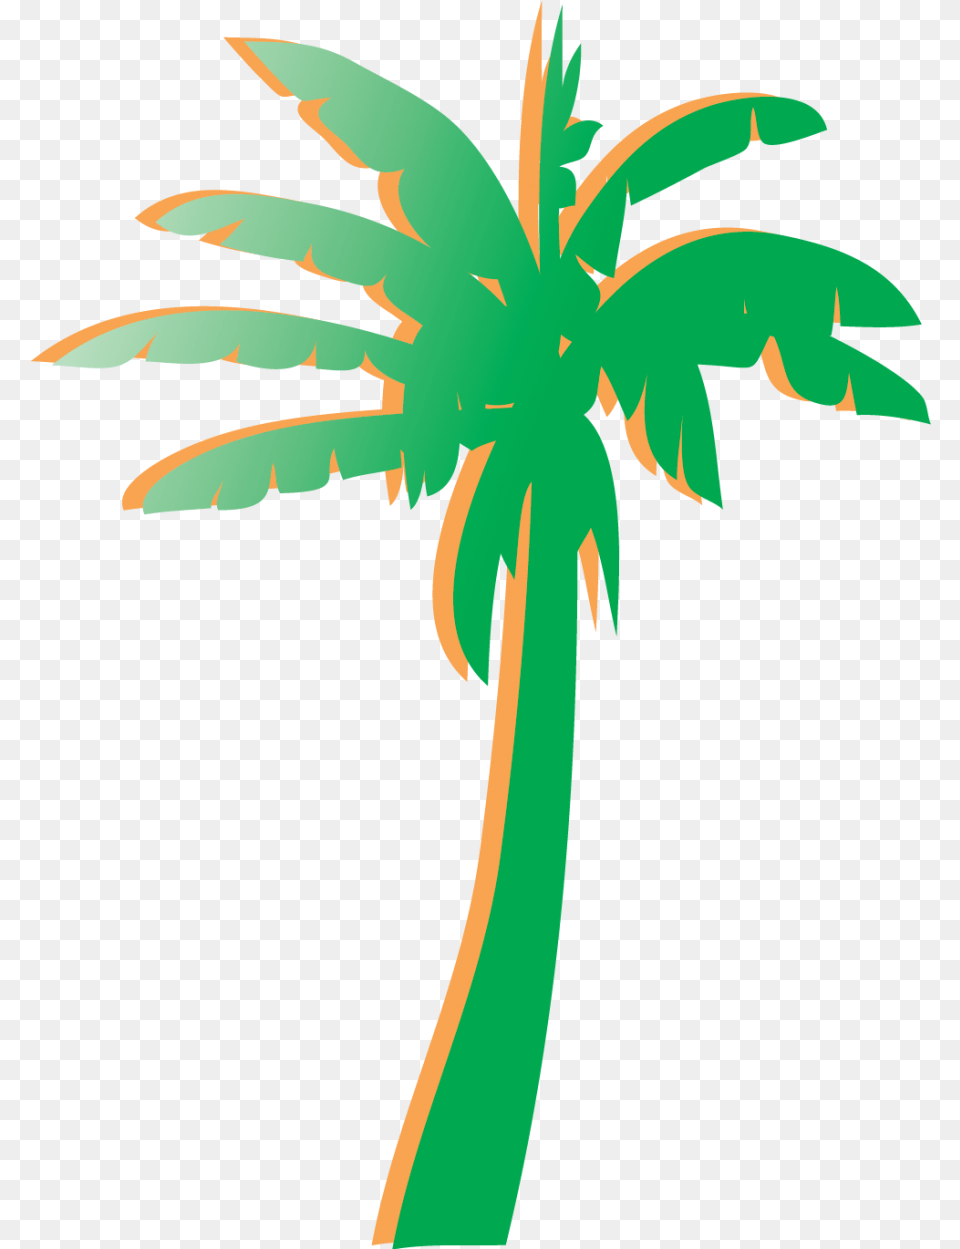 Palm Tree Graphic Jpg Library Stock Green Lodging Green Palm Tree Silhouette, Palm Tree, Plant Png